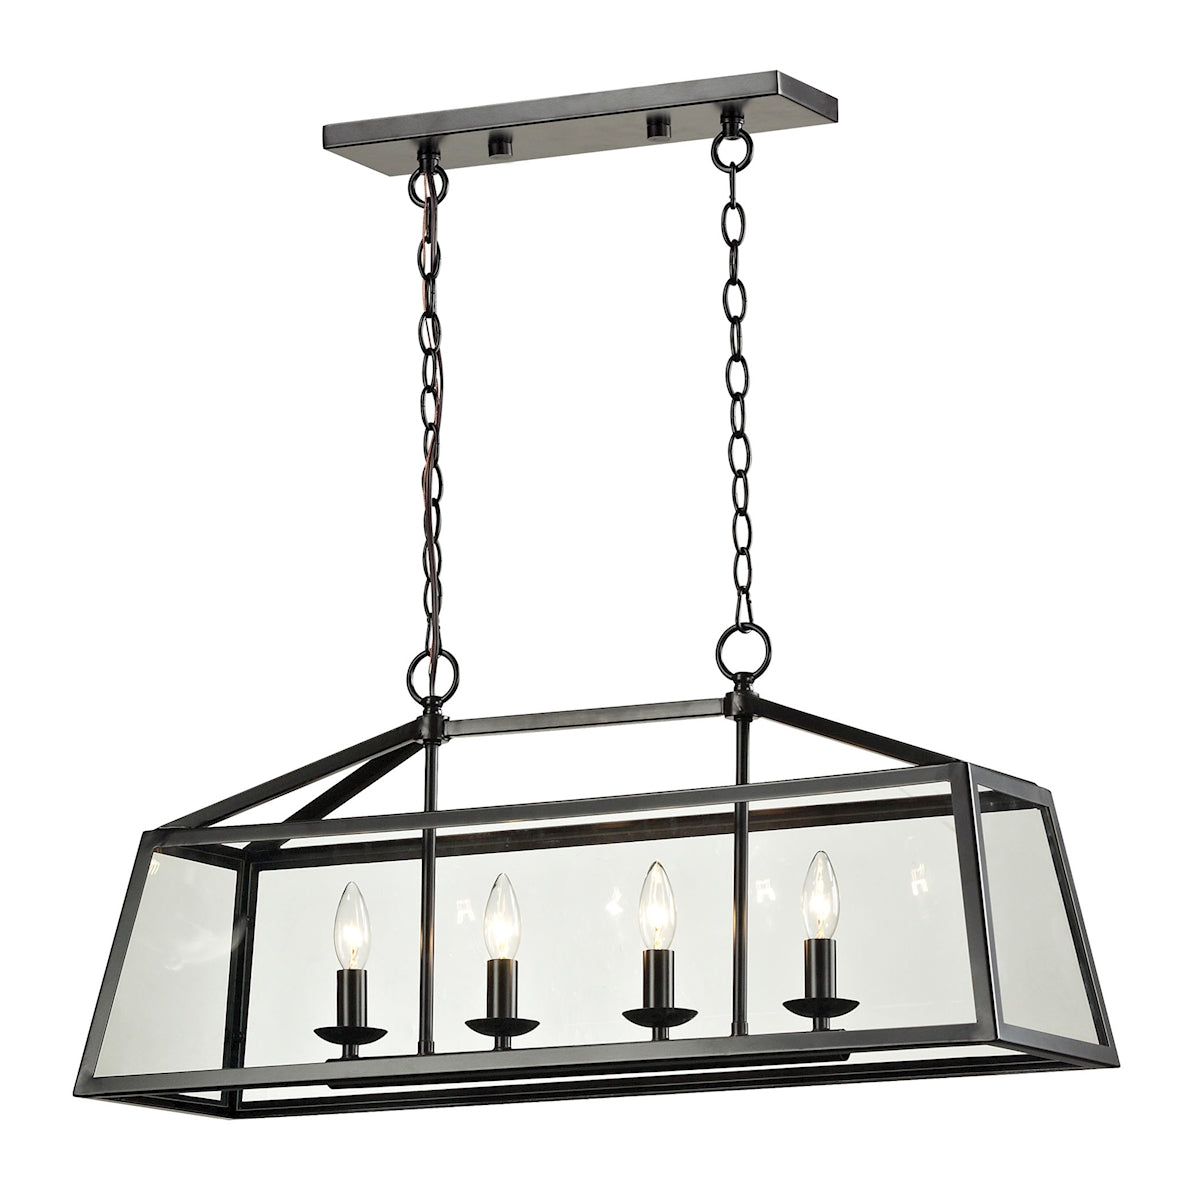 ELK Lighting 31508/4 Alanna 4-Light Linear Chandelier in Oil Rubbed Bronze with Clear Glass Panels